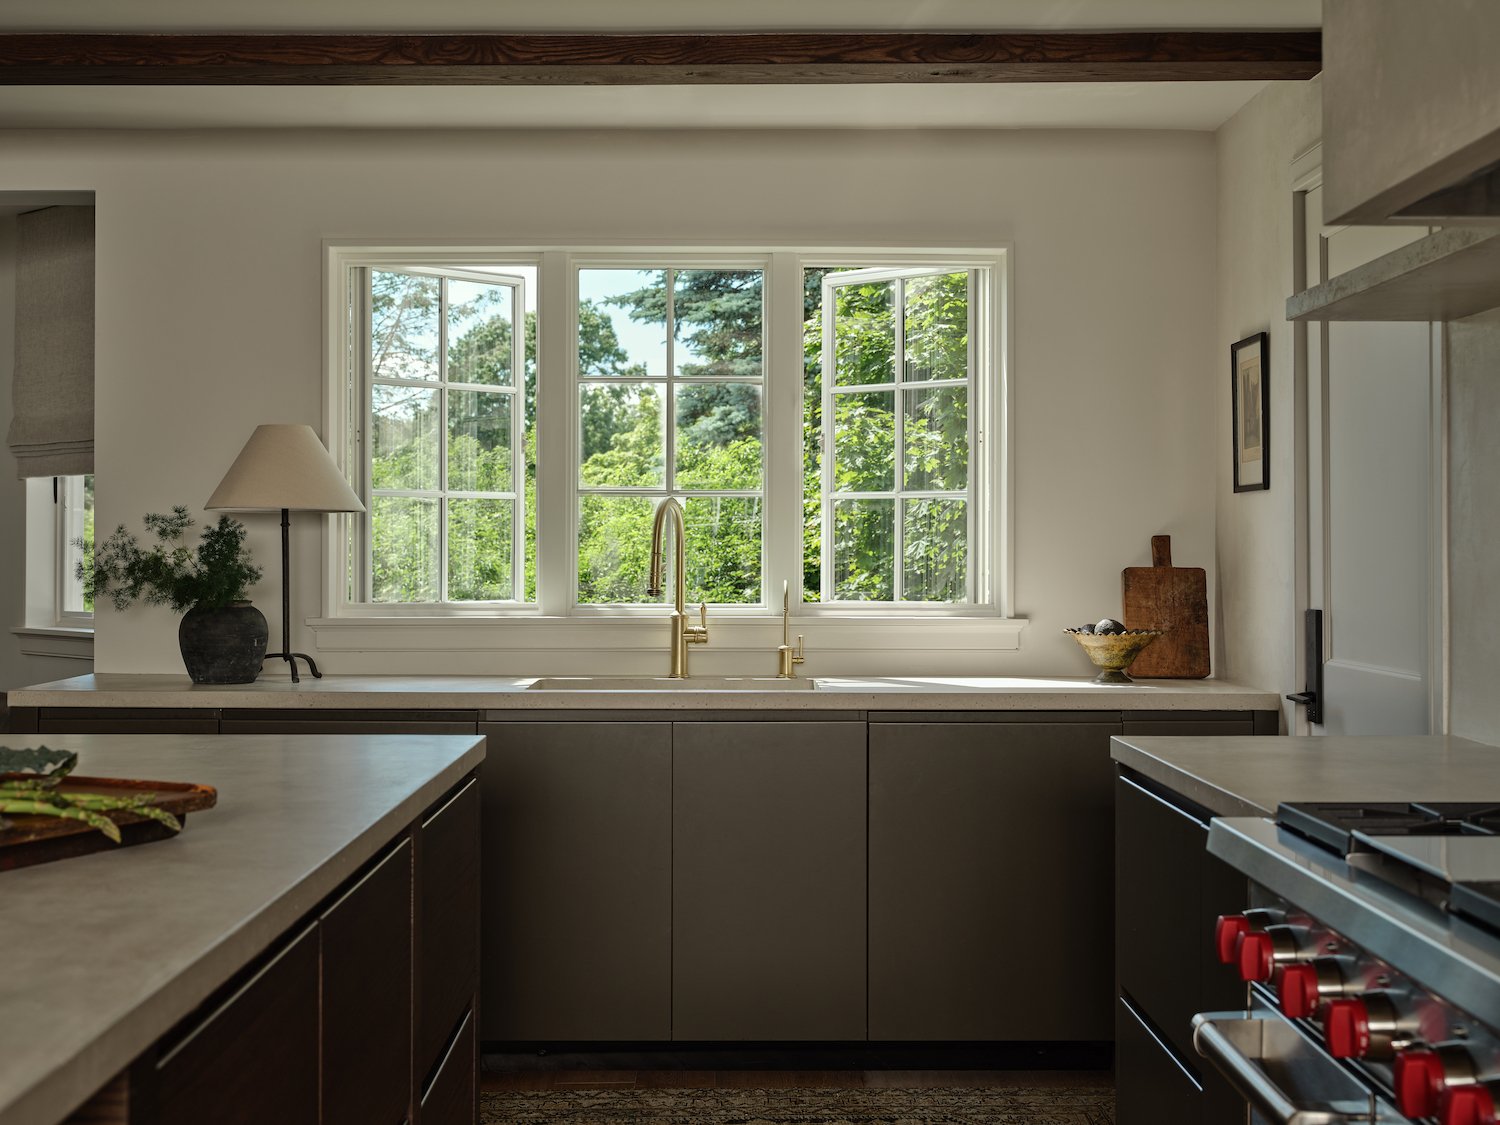 MOORE HOUSE DESIGN_NEW ENGLAND INTERIOR DESIGN FIRM_Blair Moore_ Belgian Midcentury Project_Banquette nook kitchen 09 RI1199 1_ small.jpg